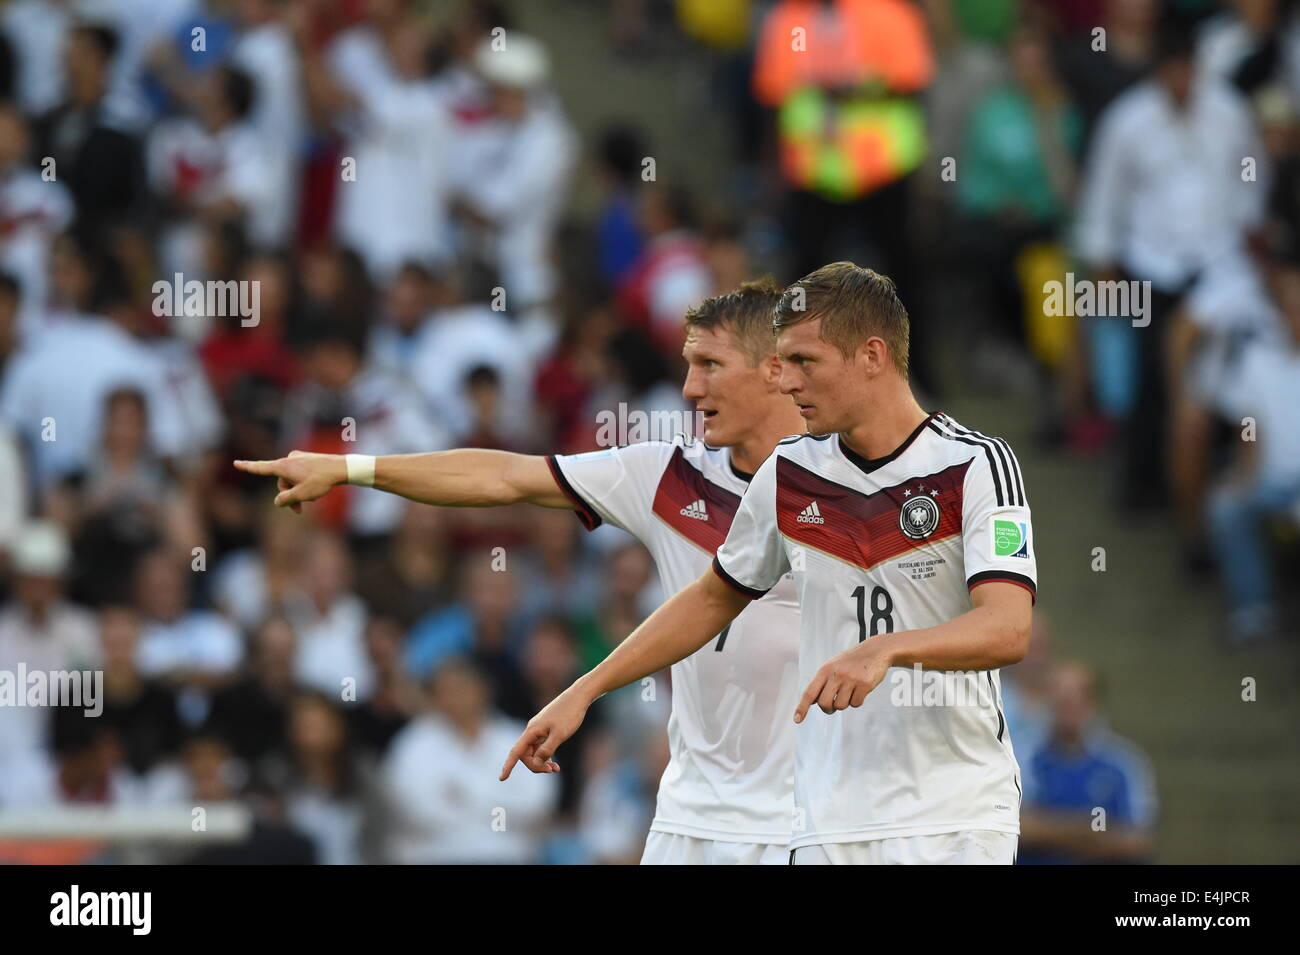 Rio de Janeiro, Brazil. 13th July, 2014. Bastian Schweinsteiger (L) and Toni Kroos of Germany react during the FIFA World Cup 2014 final soccer match between Germany and Argentina at the Estadio do Maracana in Rio de Janeiro, Brazil, 13 July 2014. Photo: Marcus Brandt/dpa/Alamy Live News Stock Photo